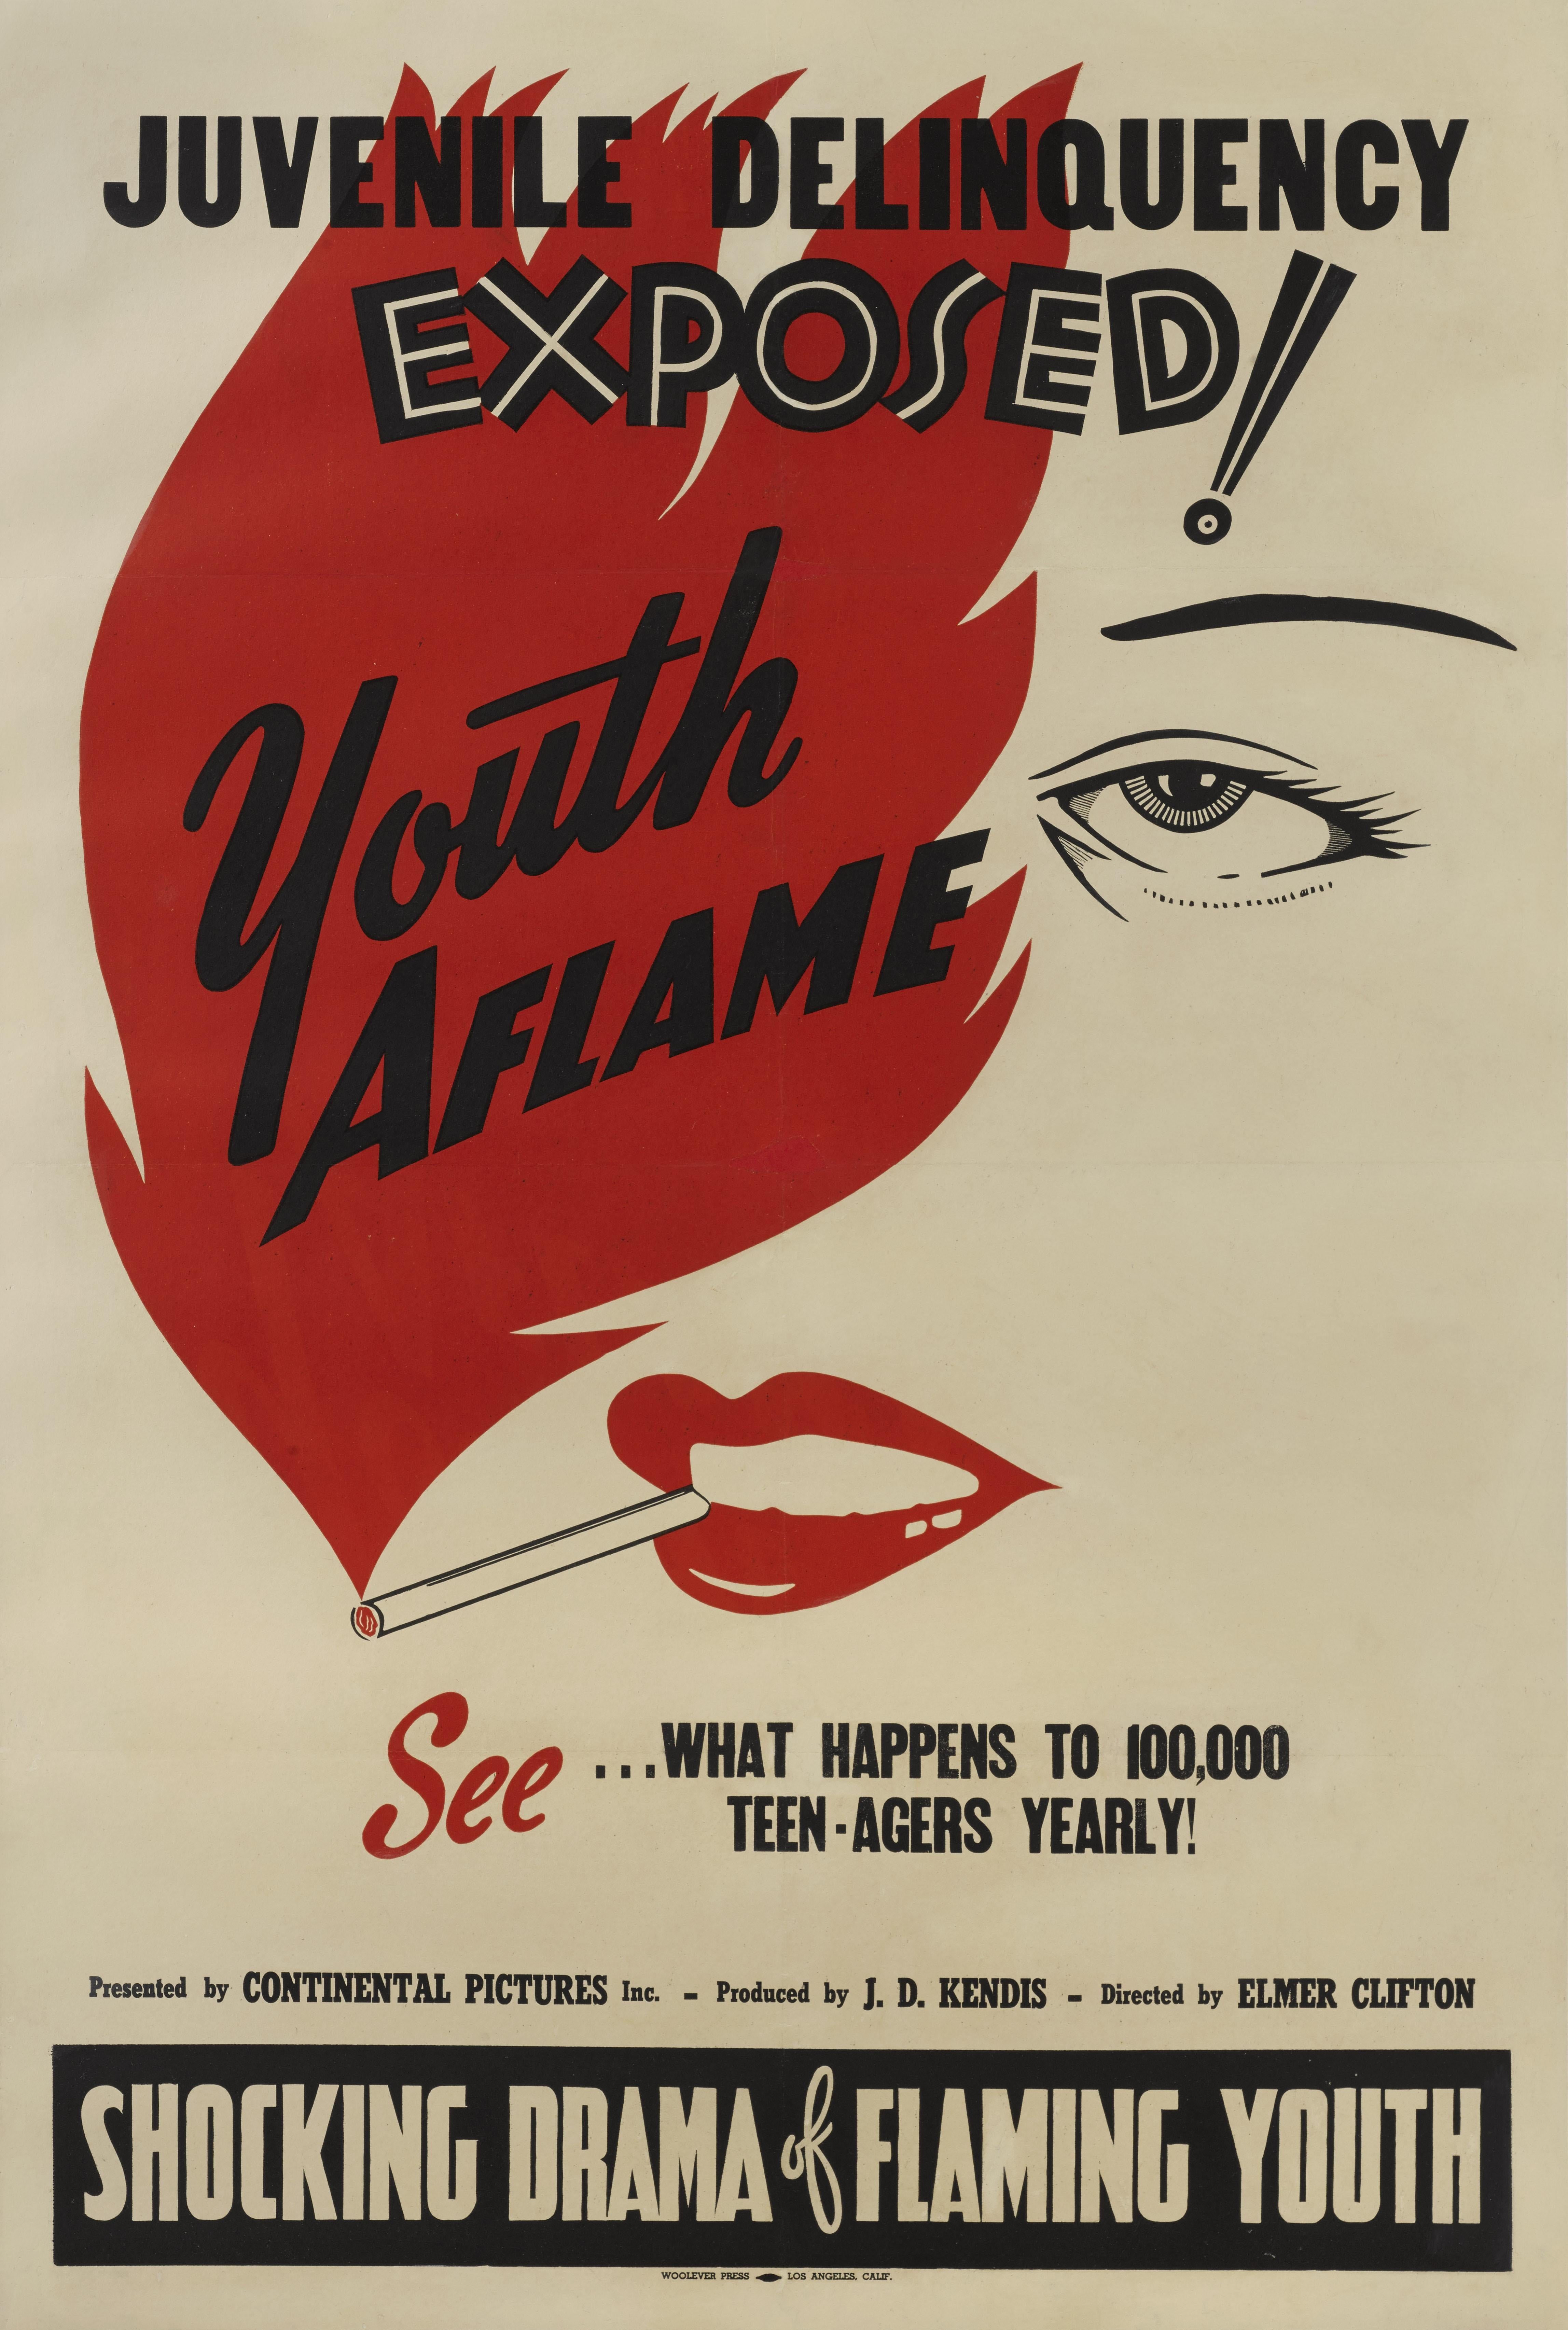 Original US film poster for the 1944 Exploitation film.
This 1944 film was directed by Elmer Clifton, and stars Joy Reese and Warren Burr. A single father struggles to keep his two teenage daughters from behaving correctly, mixing with the right